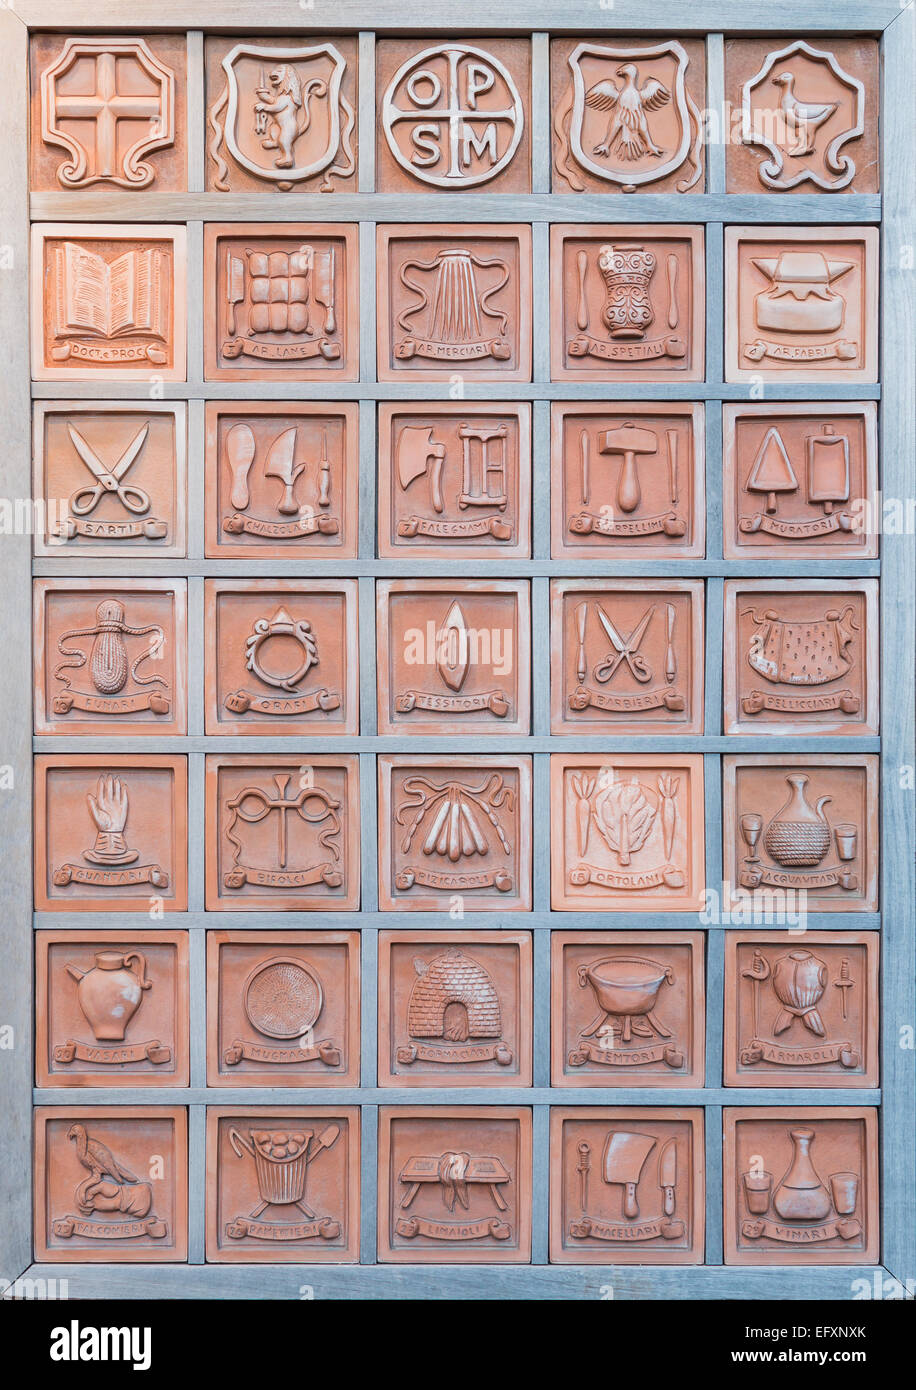 Bulletin board with pottery arts, professions and coats of arms of the districts of Orvieto Italy Stock Photo